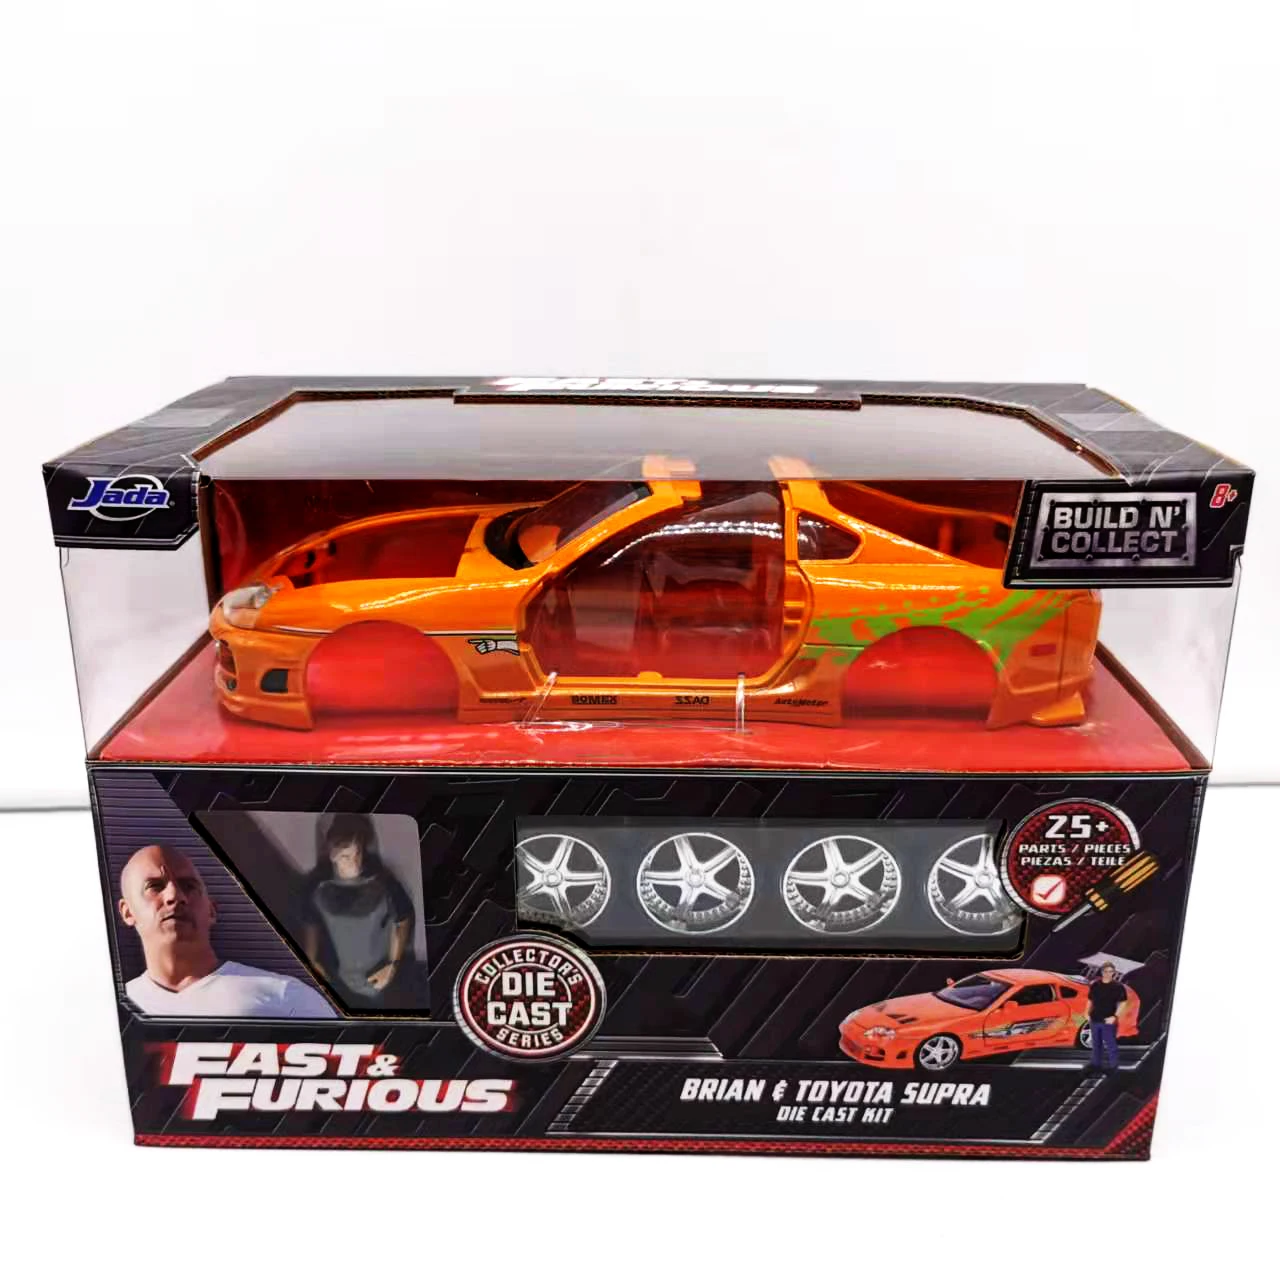 1:24 Jada High Simulator Classic Metal Fast and Furious Alloy Diecast Toy  Model Cars Toy For Children Birthday Gifts Collection - Price history &  Review, AliExpress Seller - BPLUS Toy Store